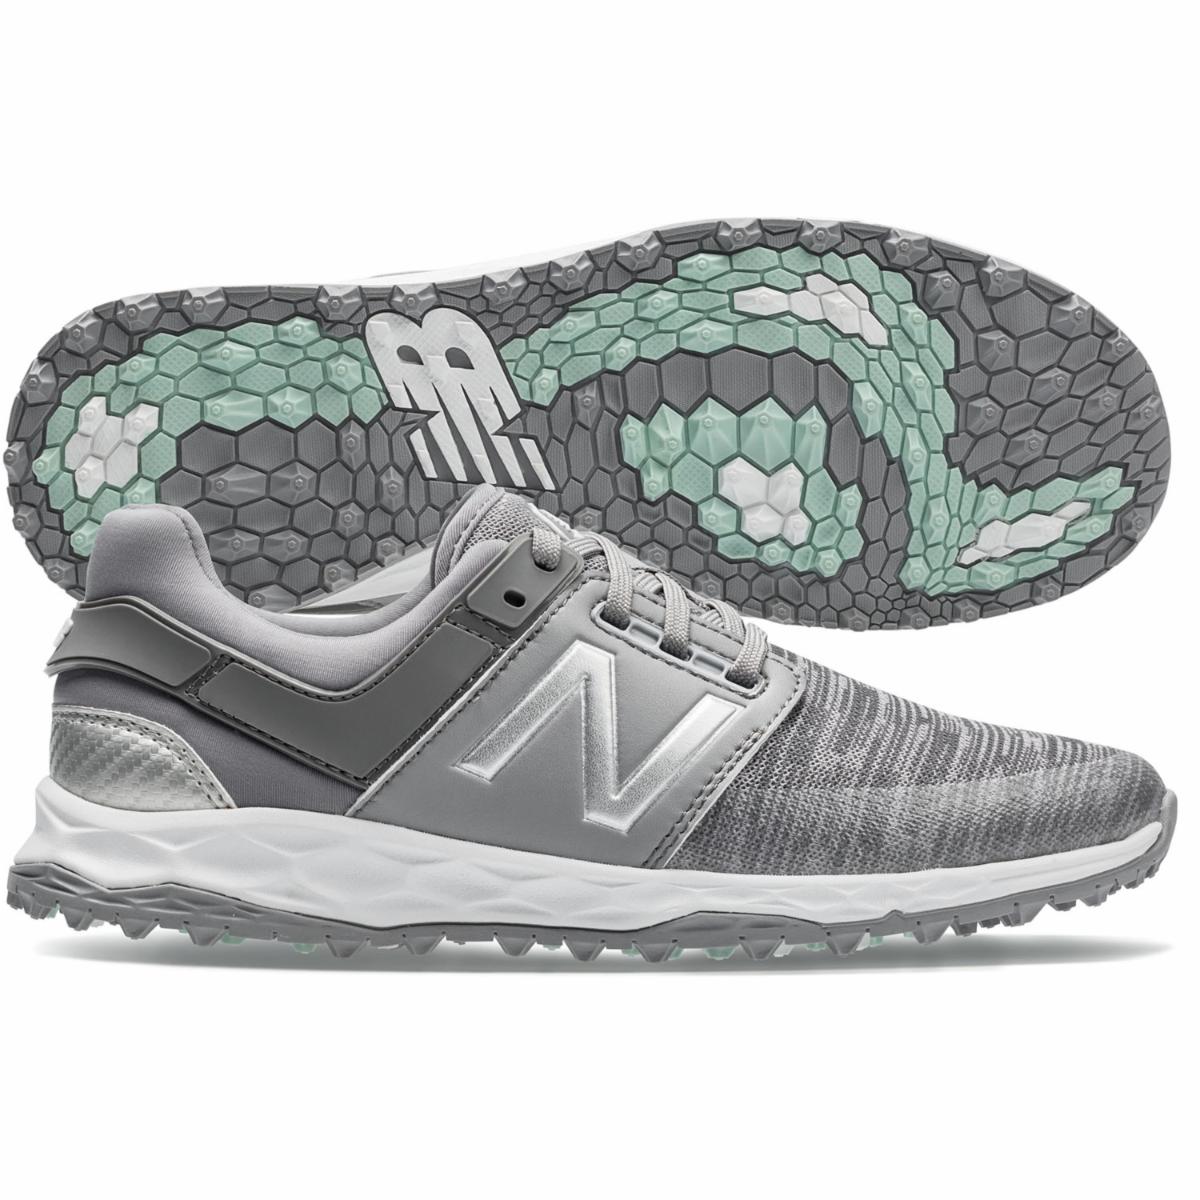 The #1 Writer in Golf: New Balance Fresh Foam Golf Shoes Preview ...